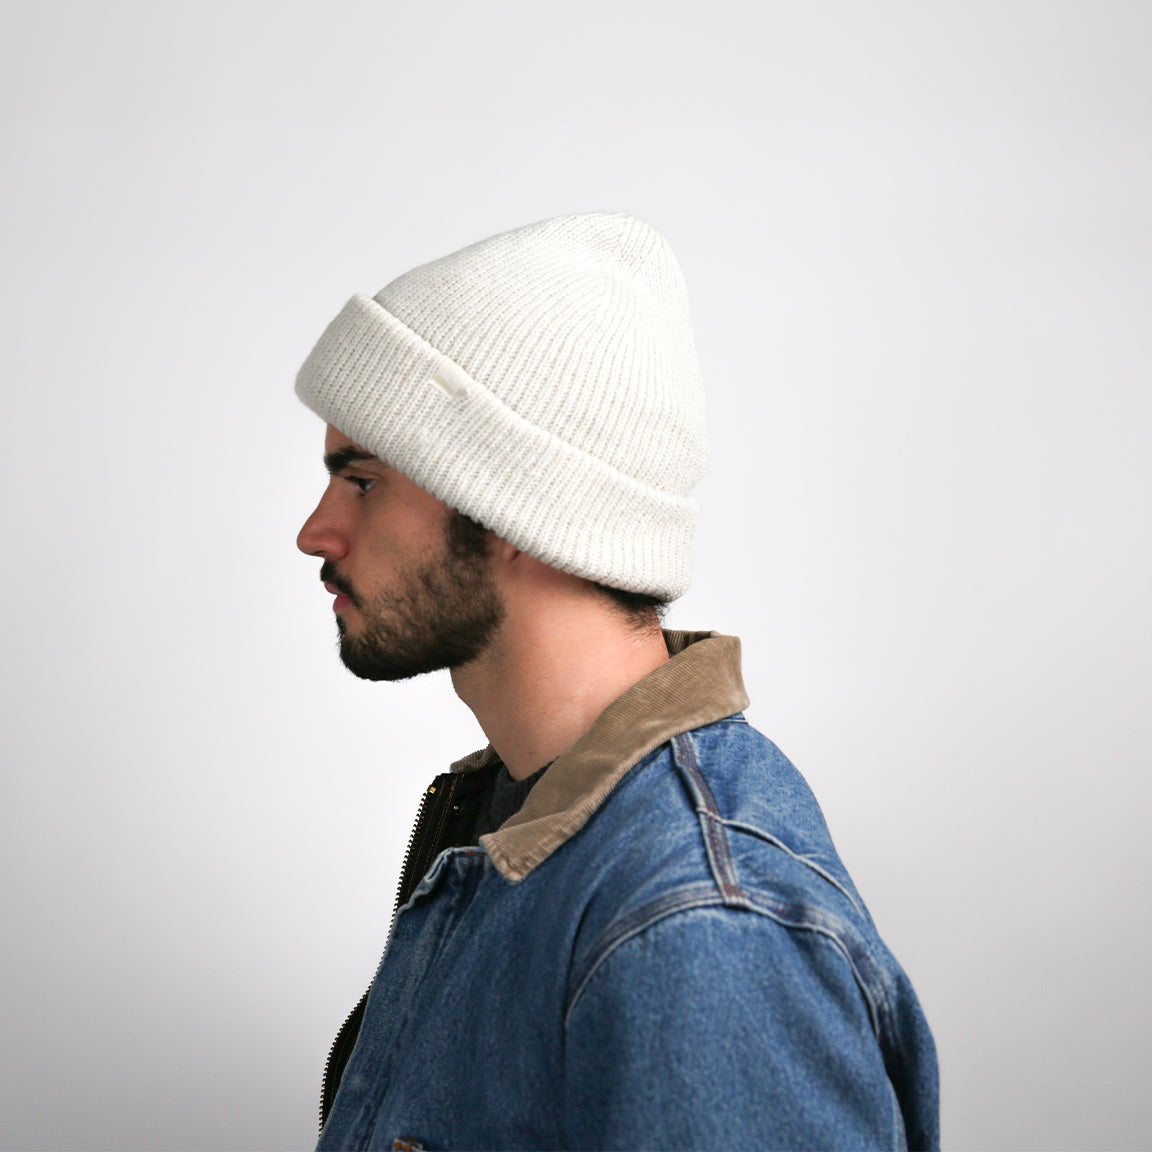 A person is shown wearing a ribbed knit beanie in a crisp white color. The beanie is designed with a cuffed brim, offering a snug fit and a timeless, versatile style.